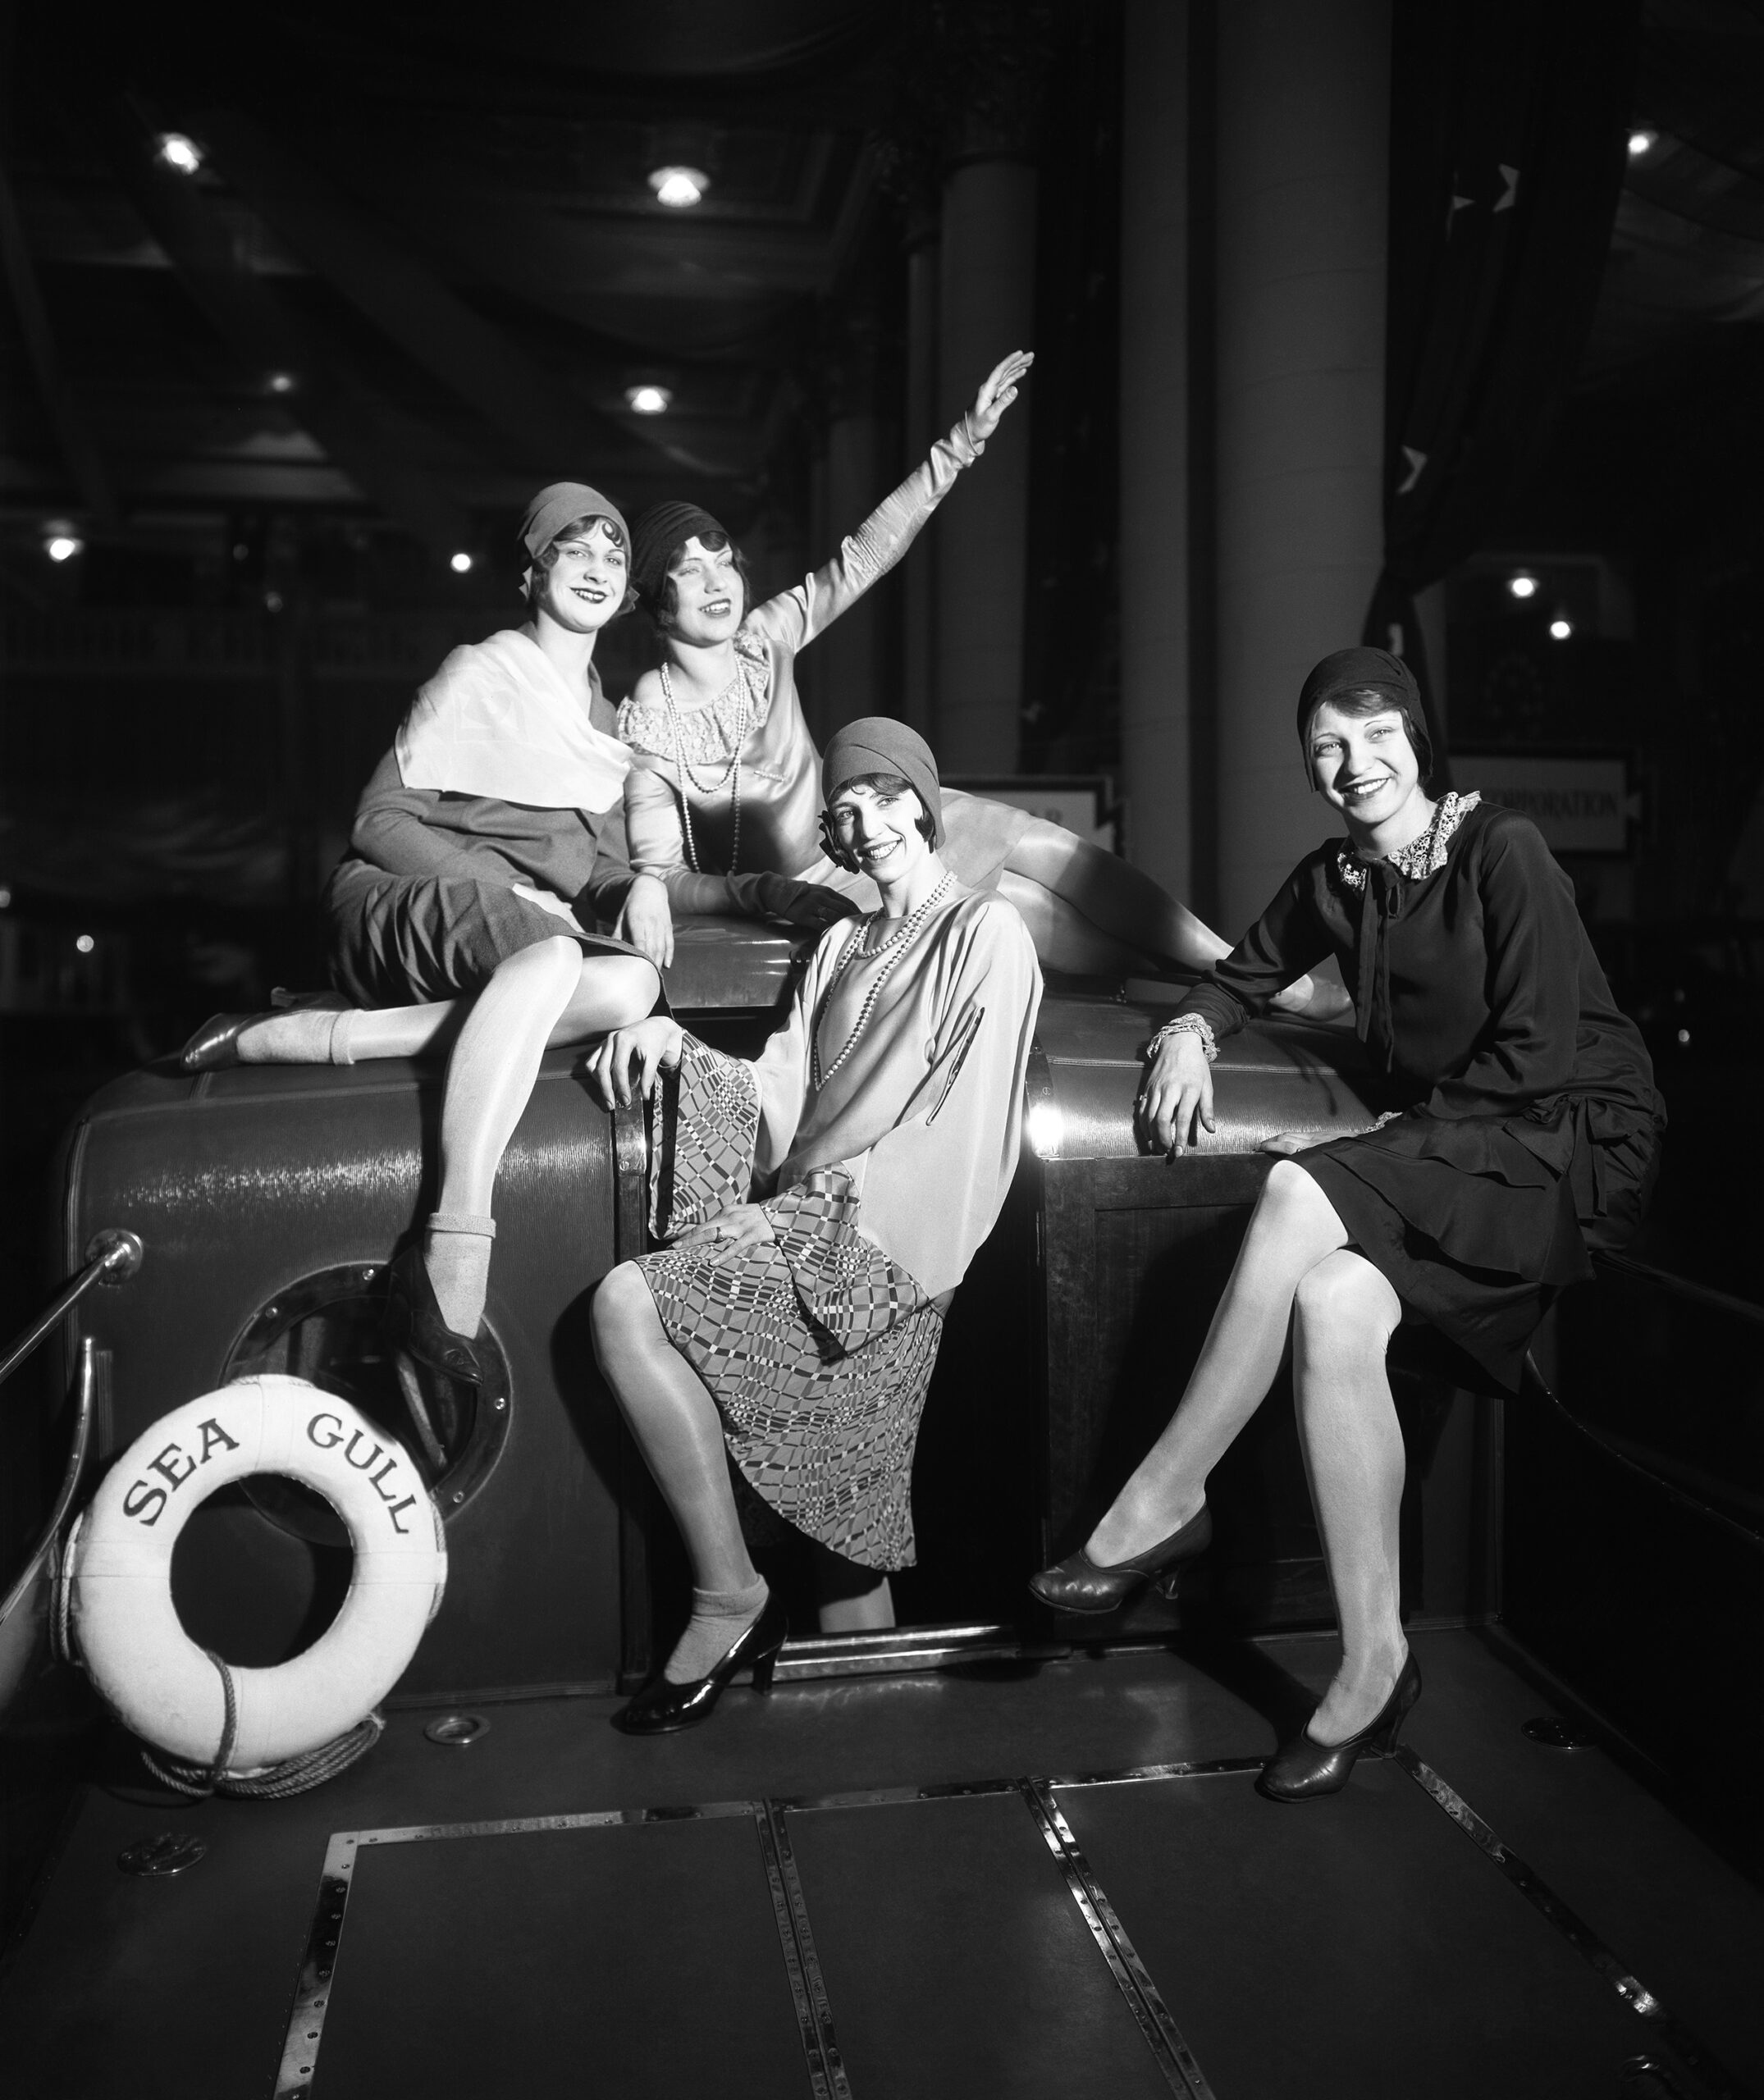 Models on boat SEA GULL. The boat was a Robinson Cruiser and the image was made during the 1929 Motor Boat Show in New York City. (Mystic Seaport Rosenfeld Collection 1984.347.33774)